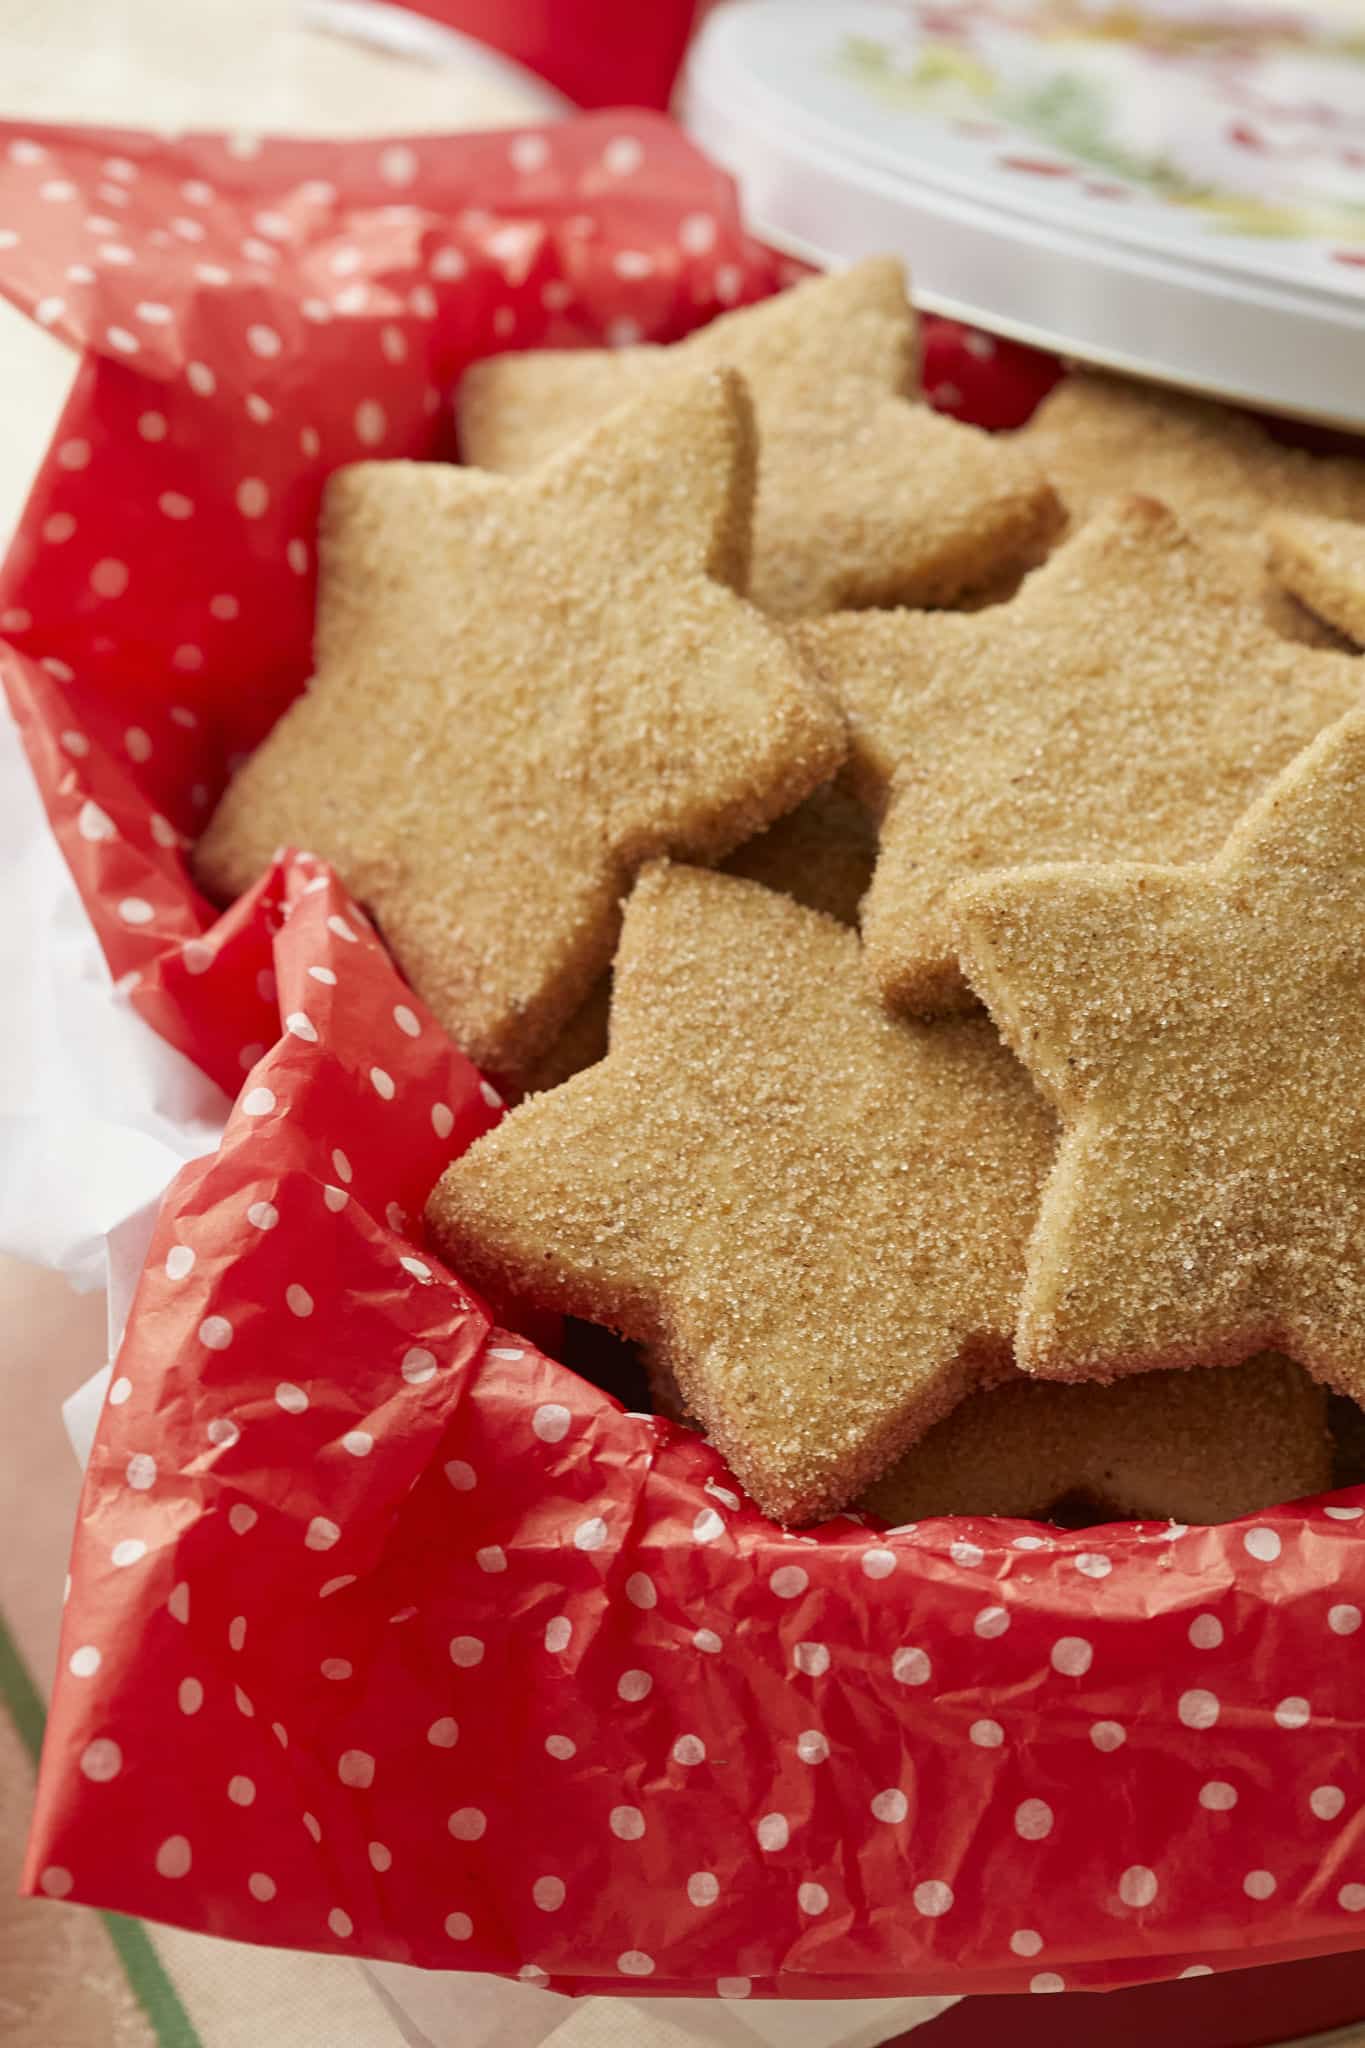 A close-up image of homemade Biscochitos, or traditional New Mexican Christmas Cookies, are presented in a gift tin. The cookies are cut into star shapes and coated in cinnamon sugar.